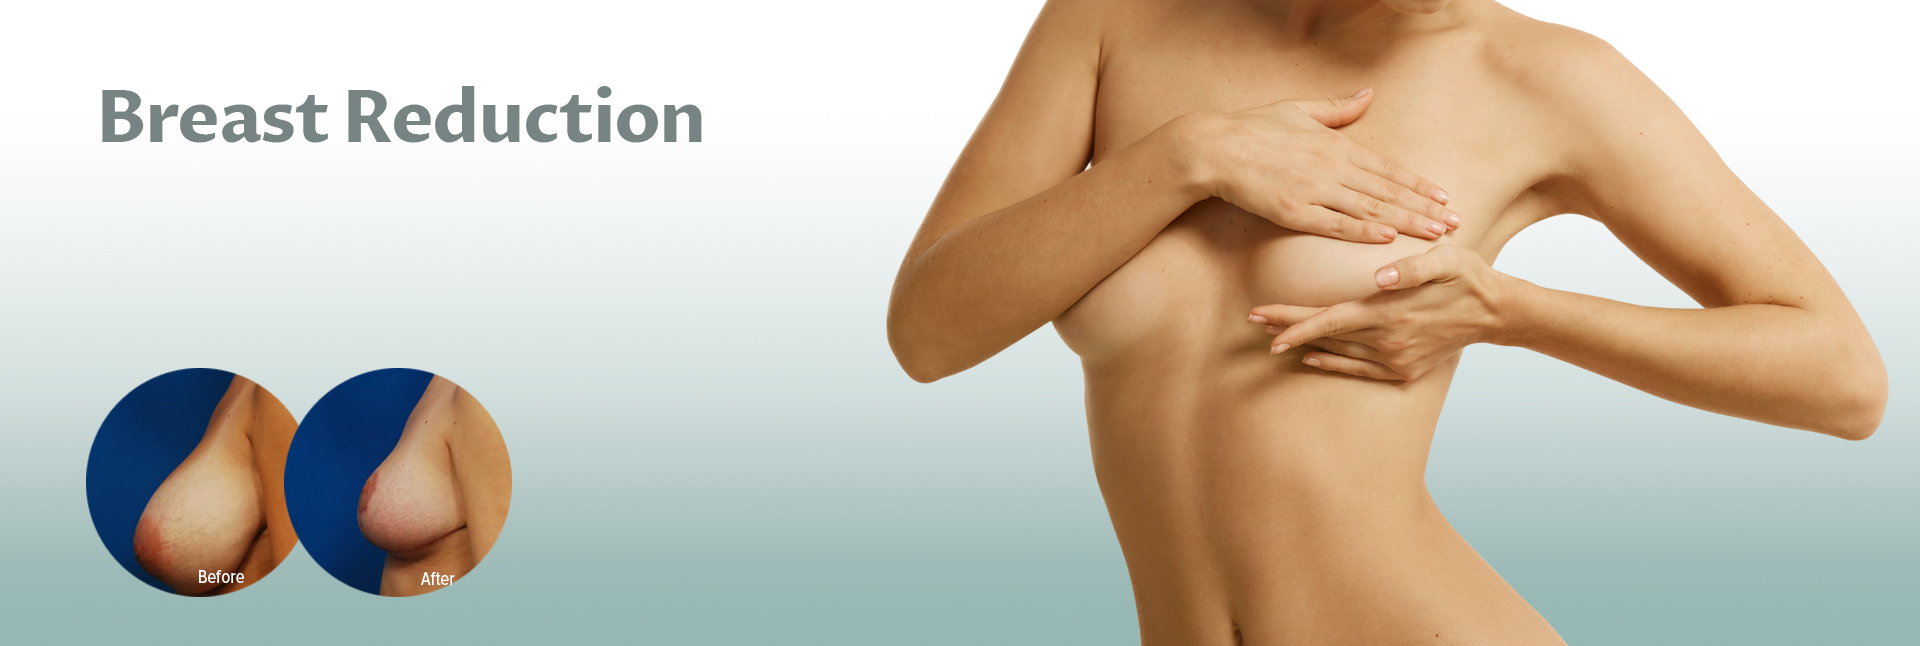 Breast Lift  Mastopexy & Breast Uplift London, UK Prices & Cost